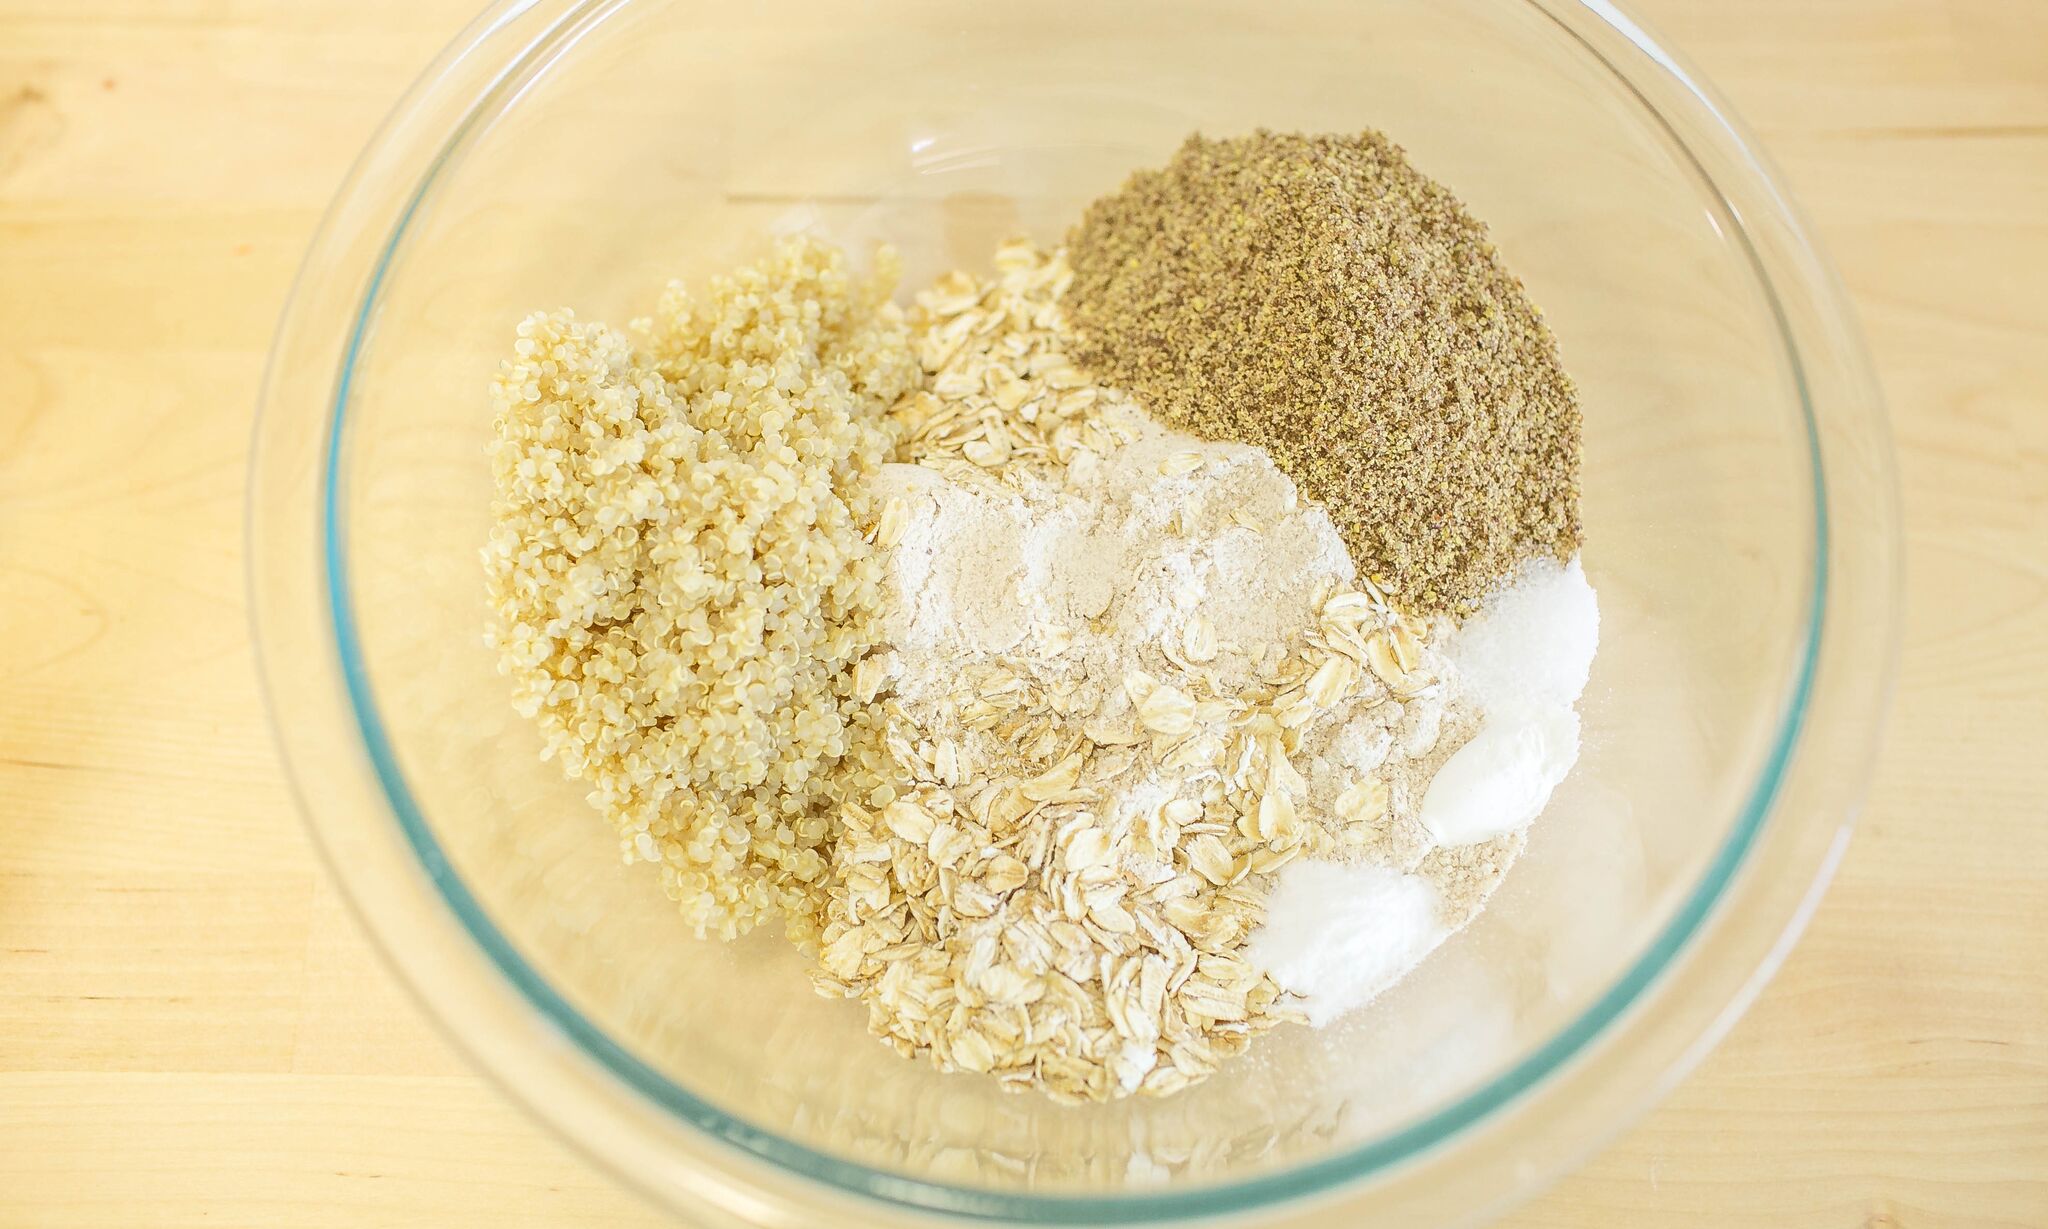 In a medium bowl mix together flour, oats, quinoa, flax seed meal, baking powder, baking soda and salt .